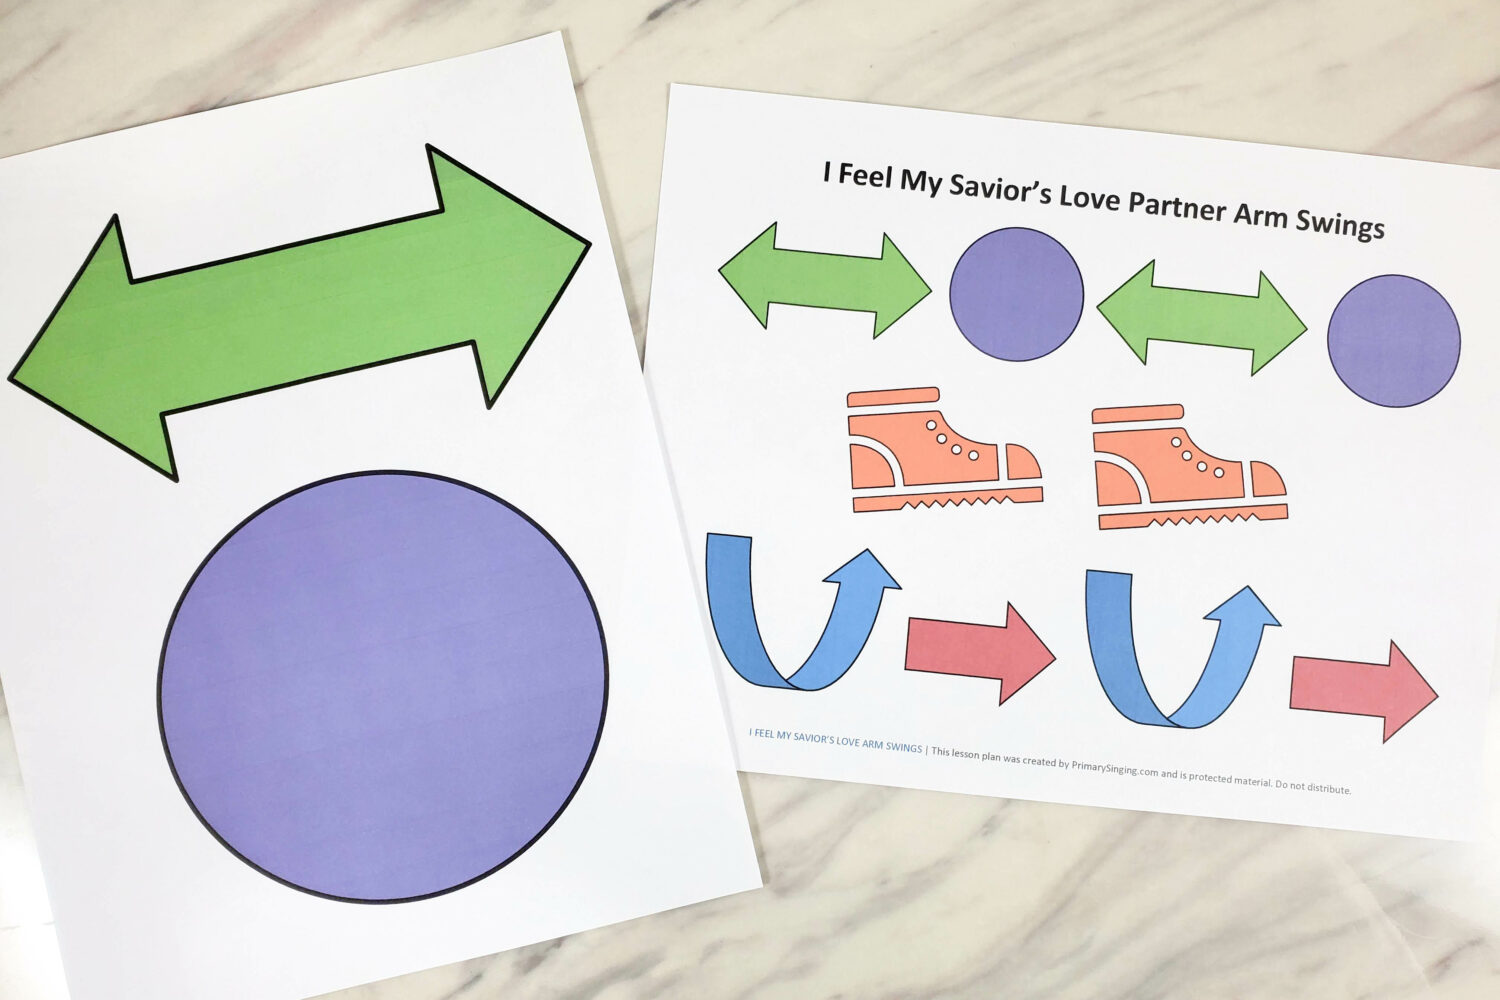 For a fun way to review I Feel My Savior's Love this month, try out this simple I Feel My Savior's Love Partner Arm Swings activity! Have each child find a partner and have some fun with this people interactions activity! #LDS #Primary #Singingtime #Musicleader